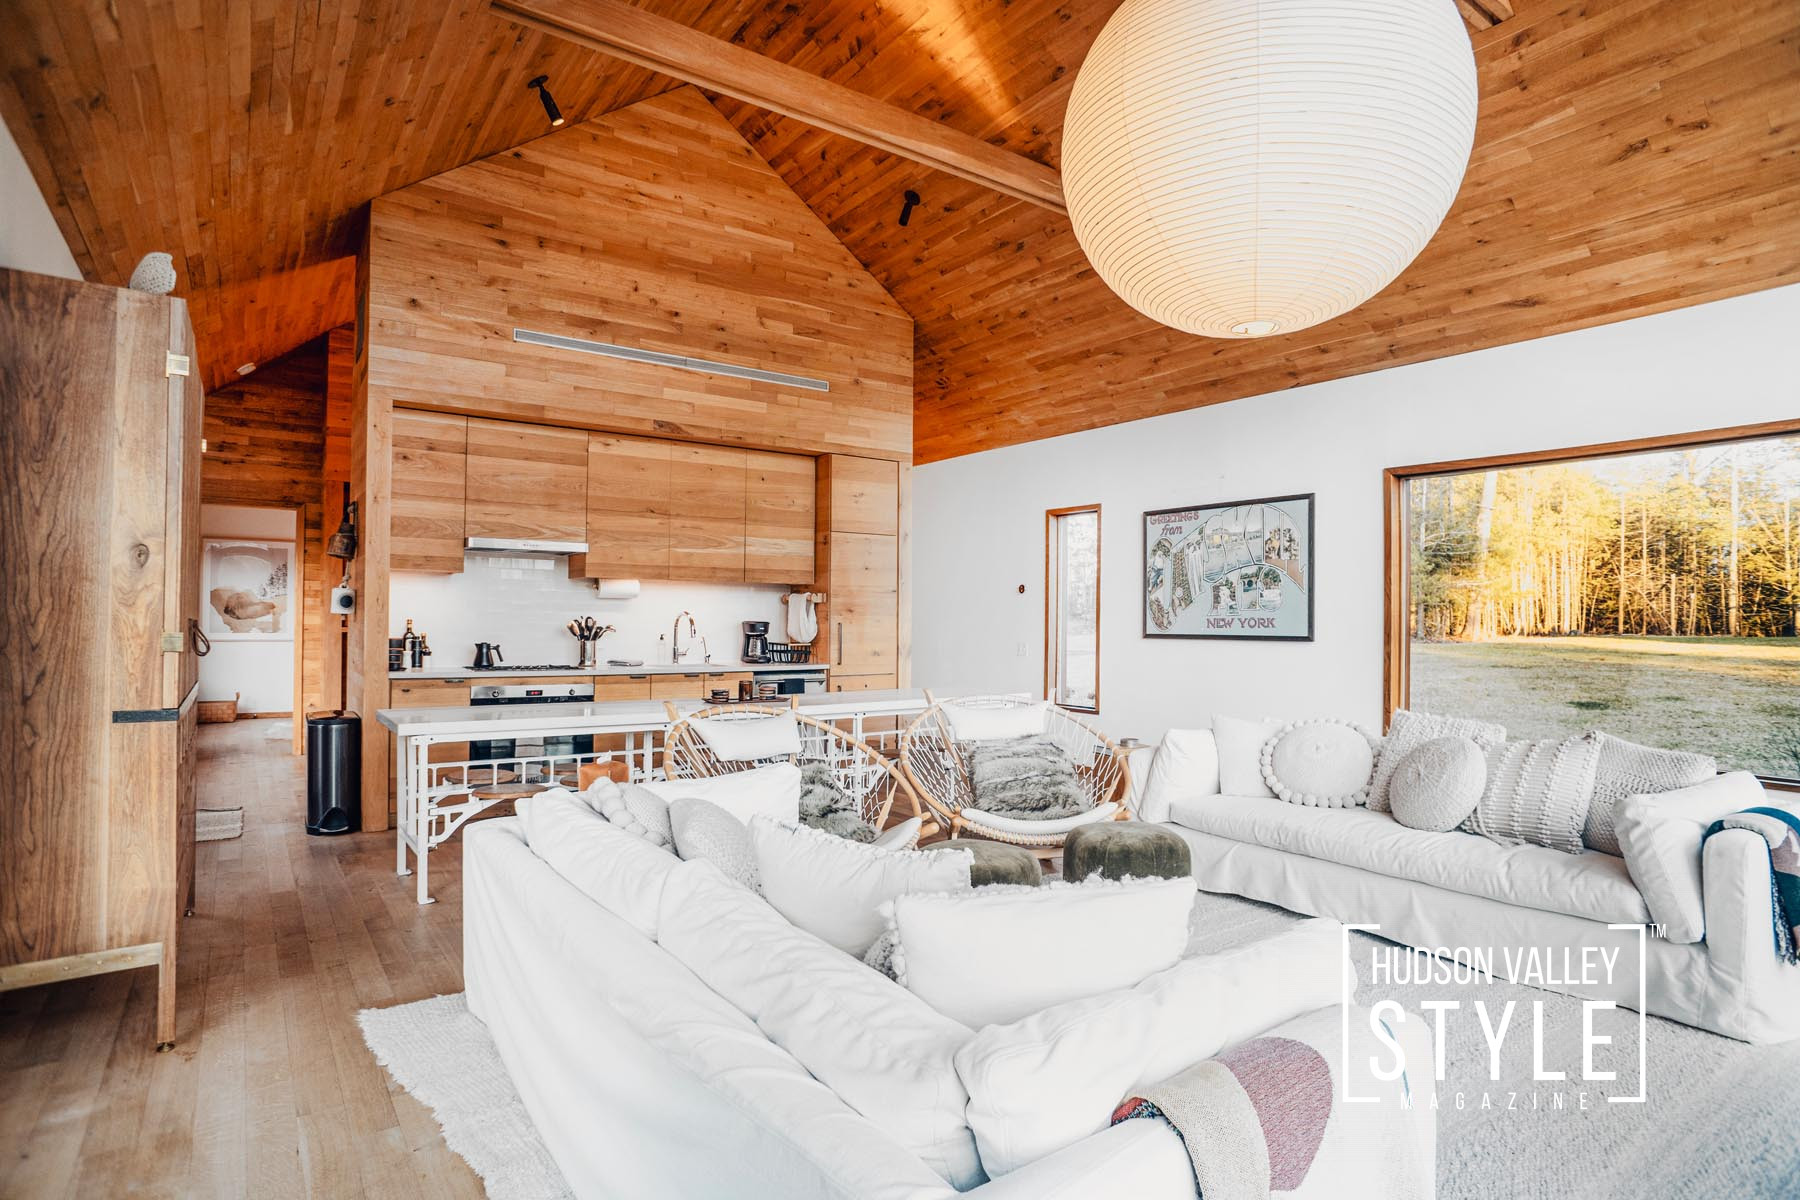 How Much Does a Professional Real Estate Photographer Cost? – Real Estate Photography by Maxwell Alexander / Duncan Avenue Studios for Alluvion Media – Hudson Valley, Catskills, NYC